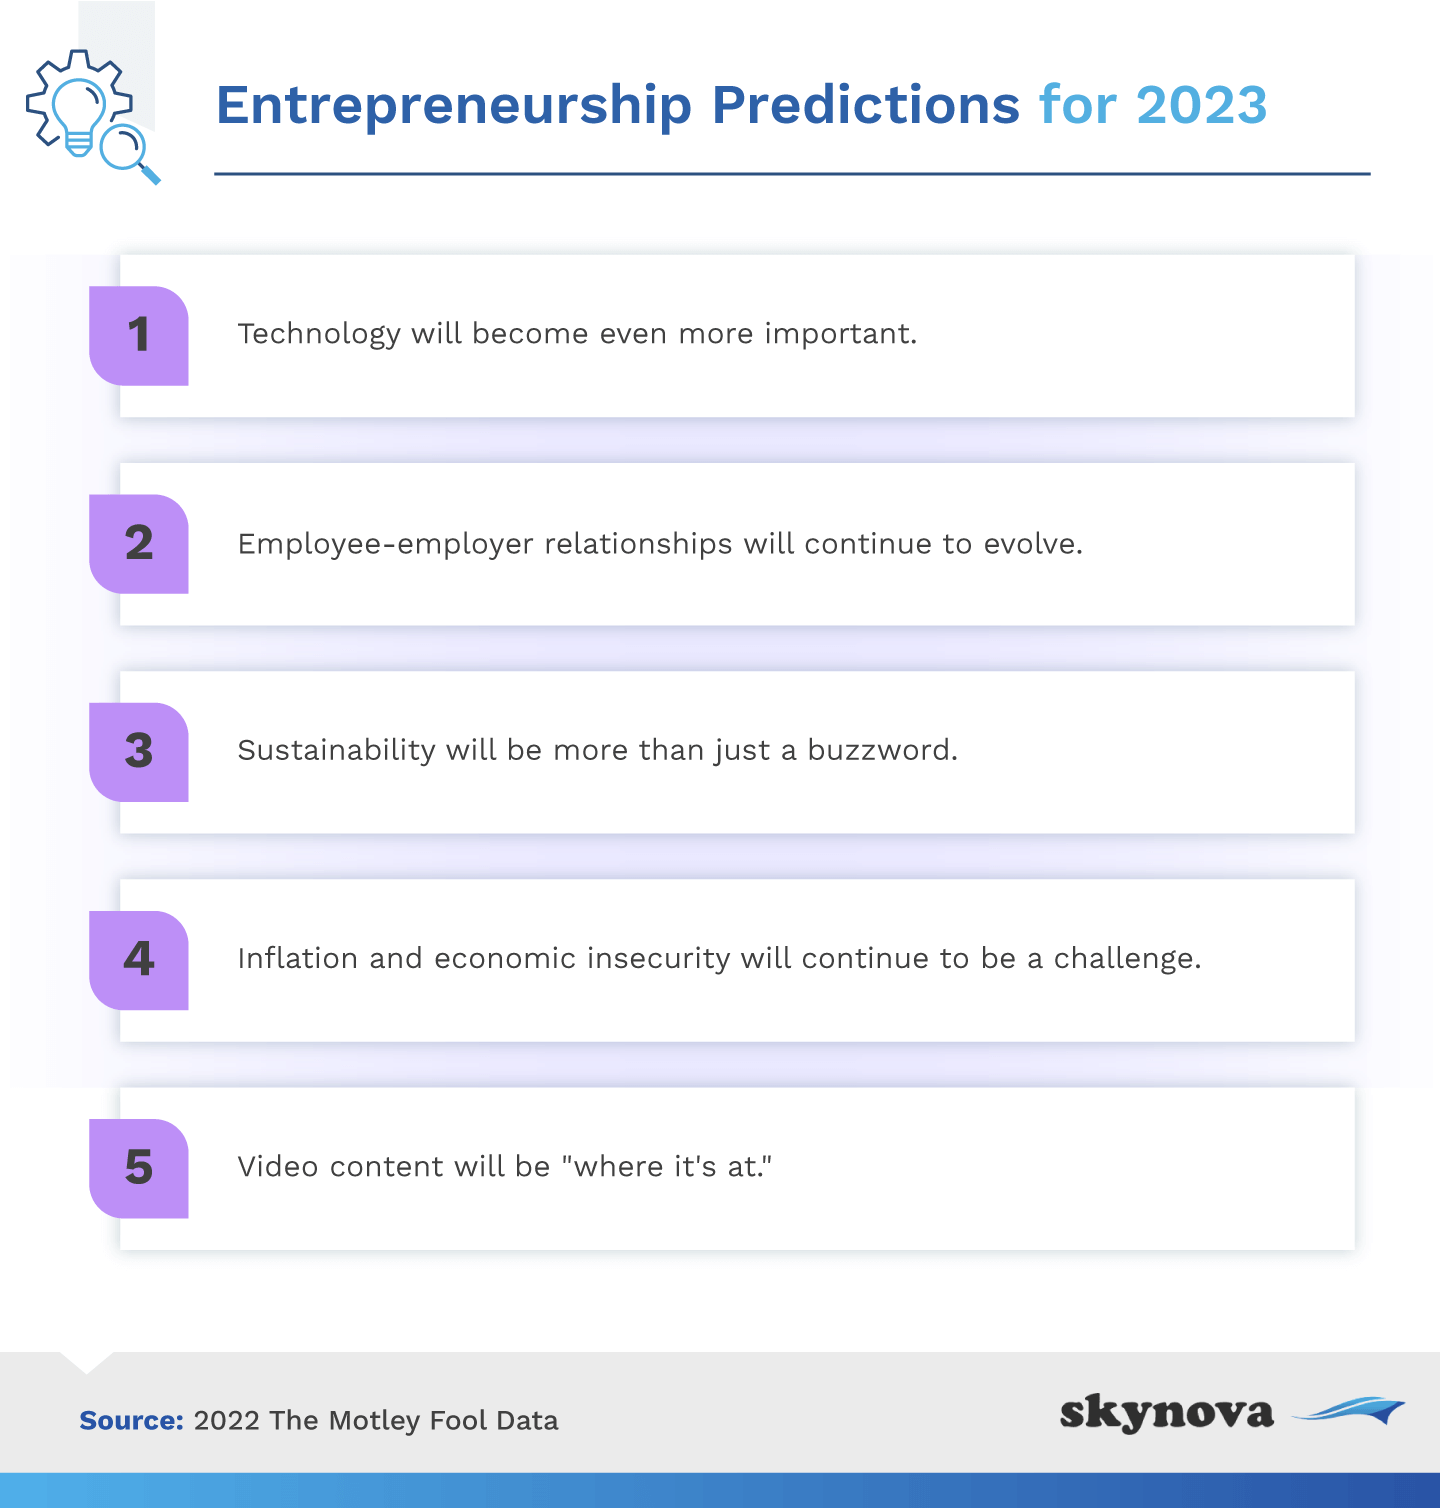 What will help startups in 2023?